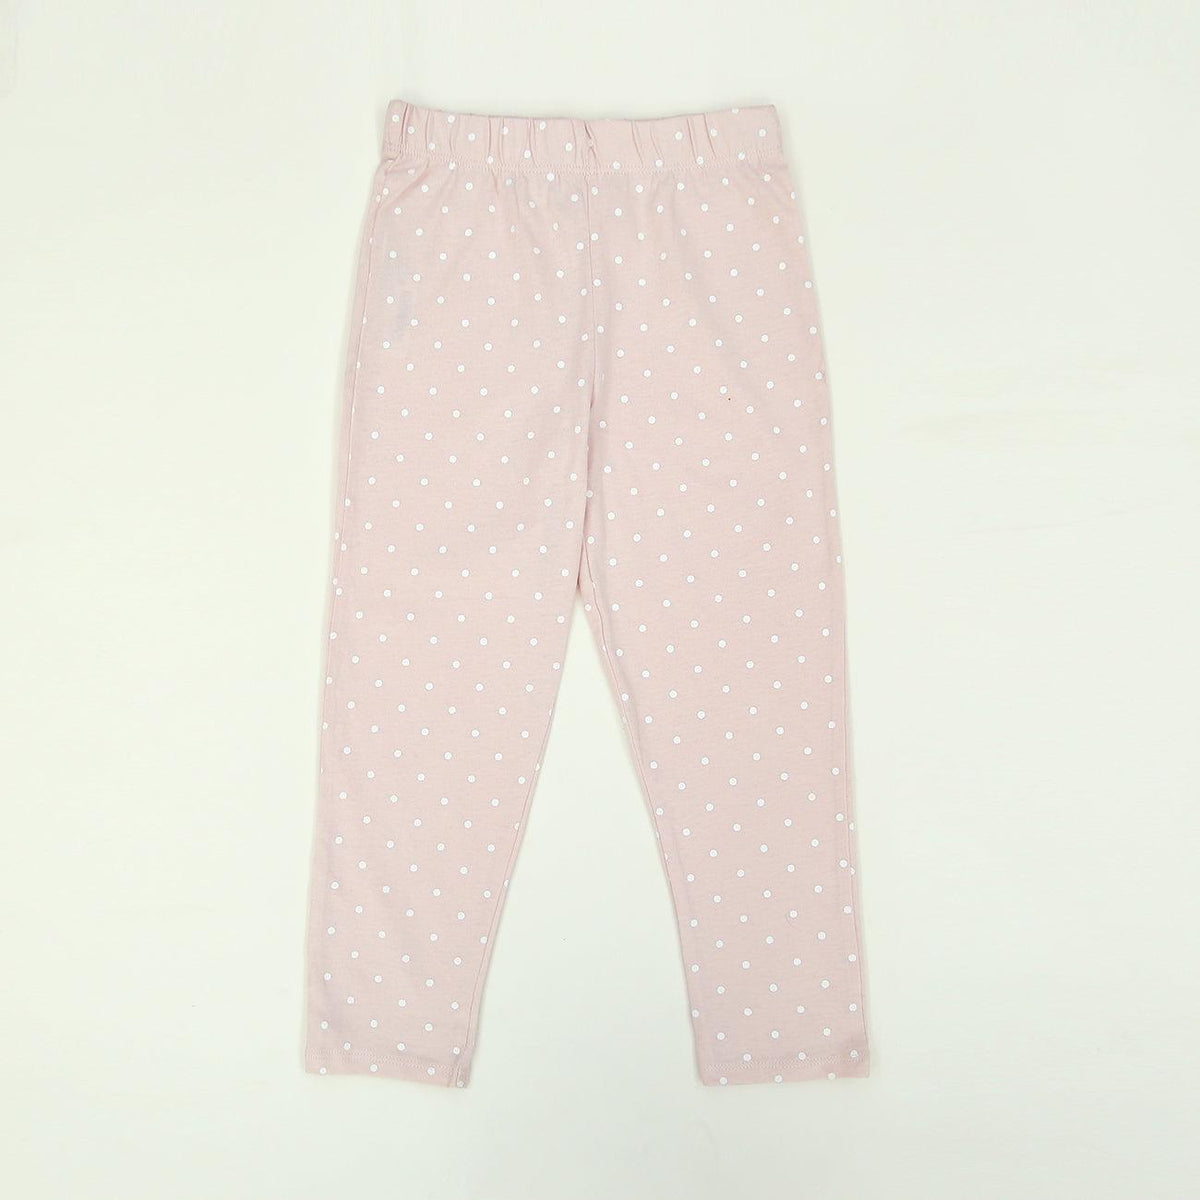 Imported All-Over Printed Soft Cotton Legging For Girls 9-12 MONTH - 3-4 YRS (LE-11572) - Brands River